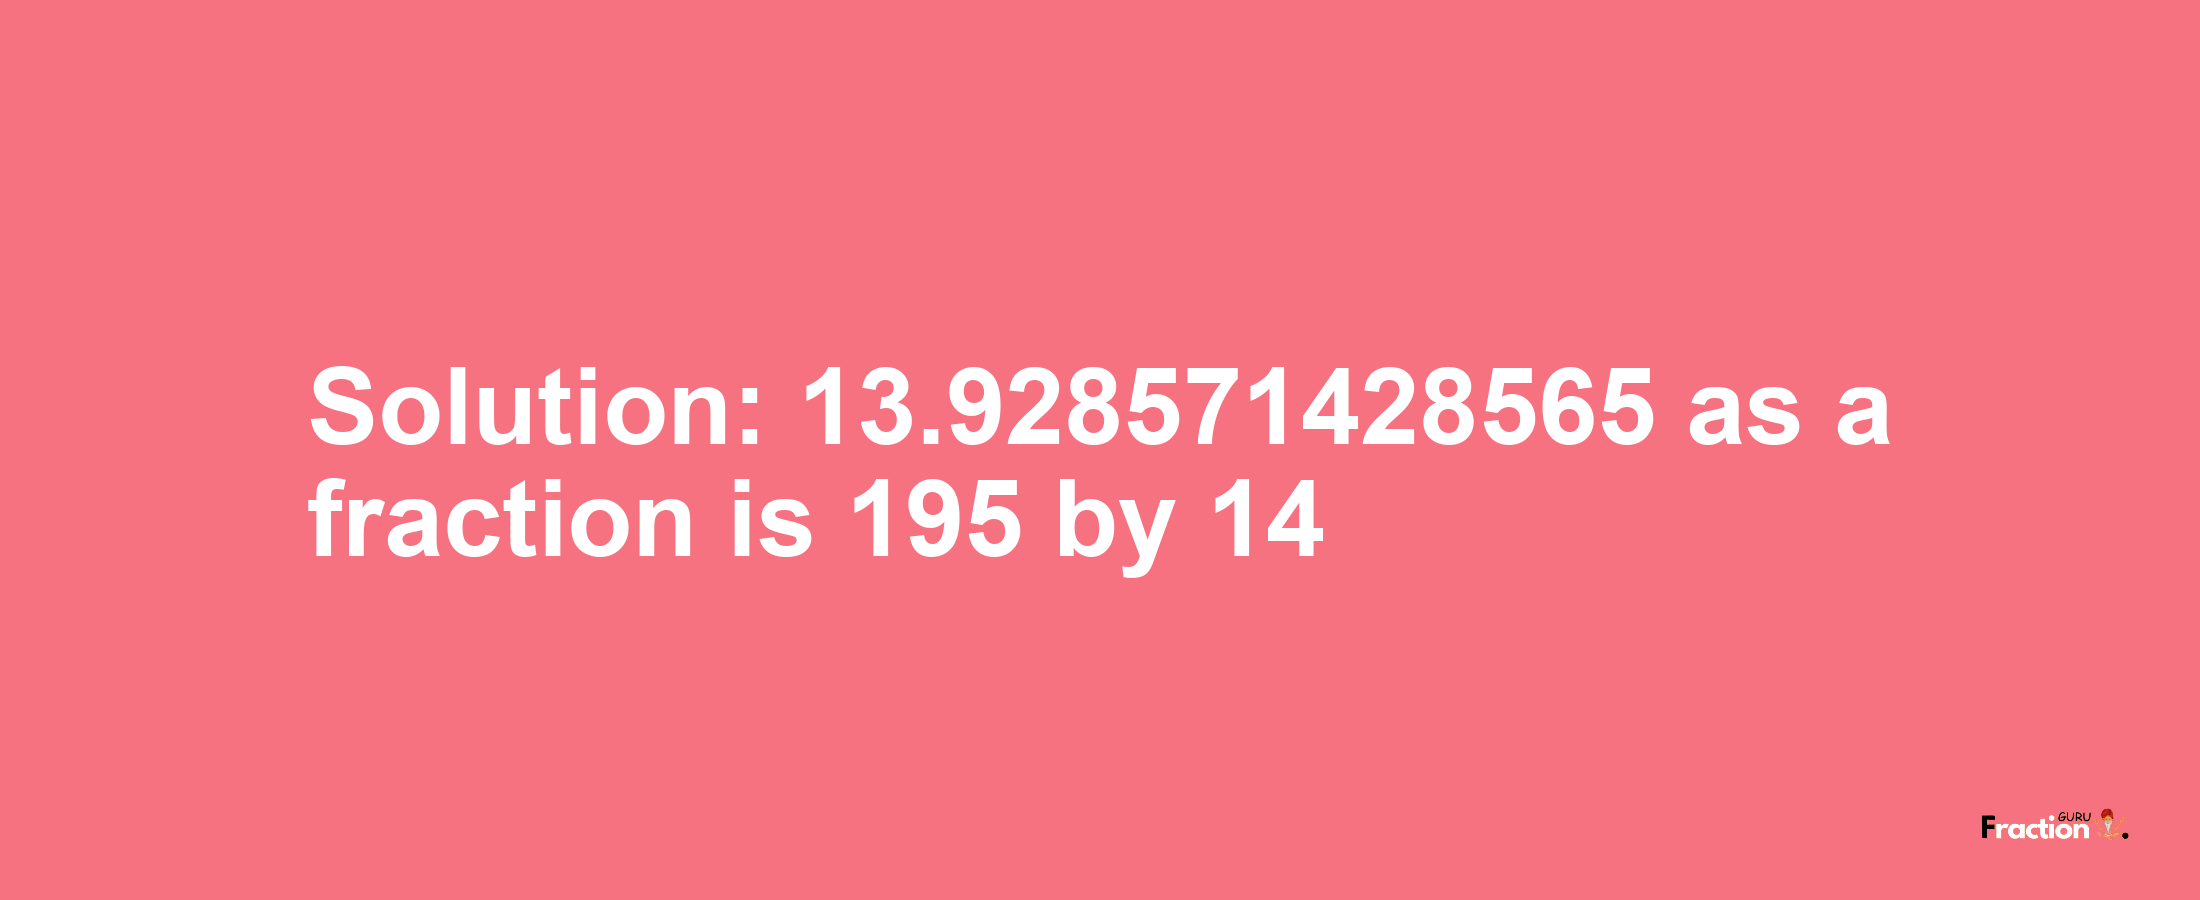 Solution:13.928571428565 as a fraction is 195/14